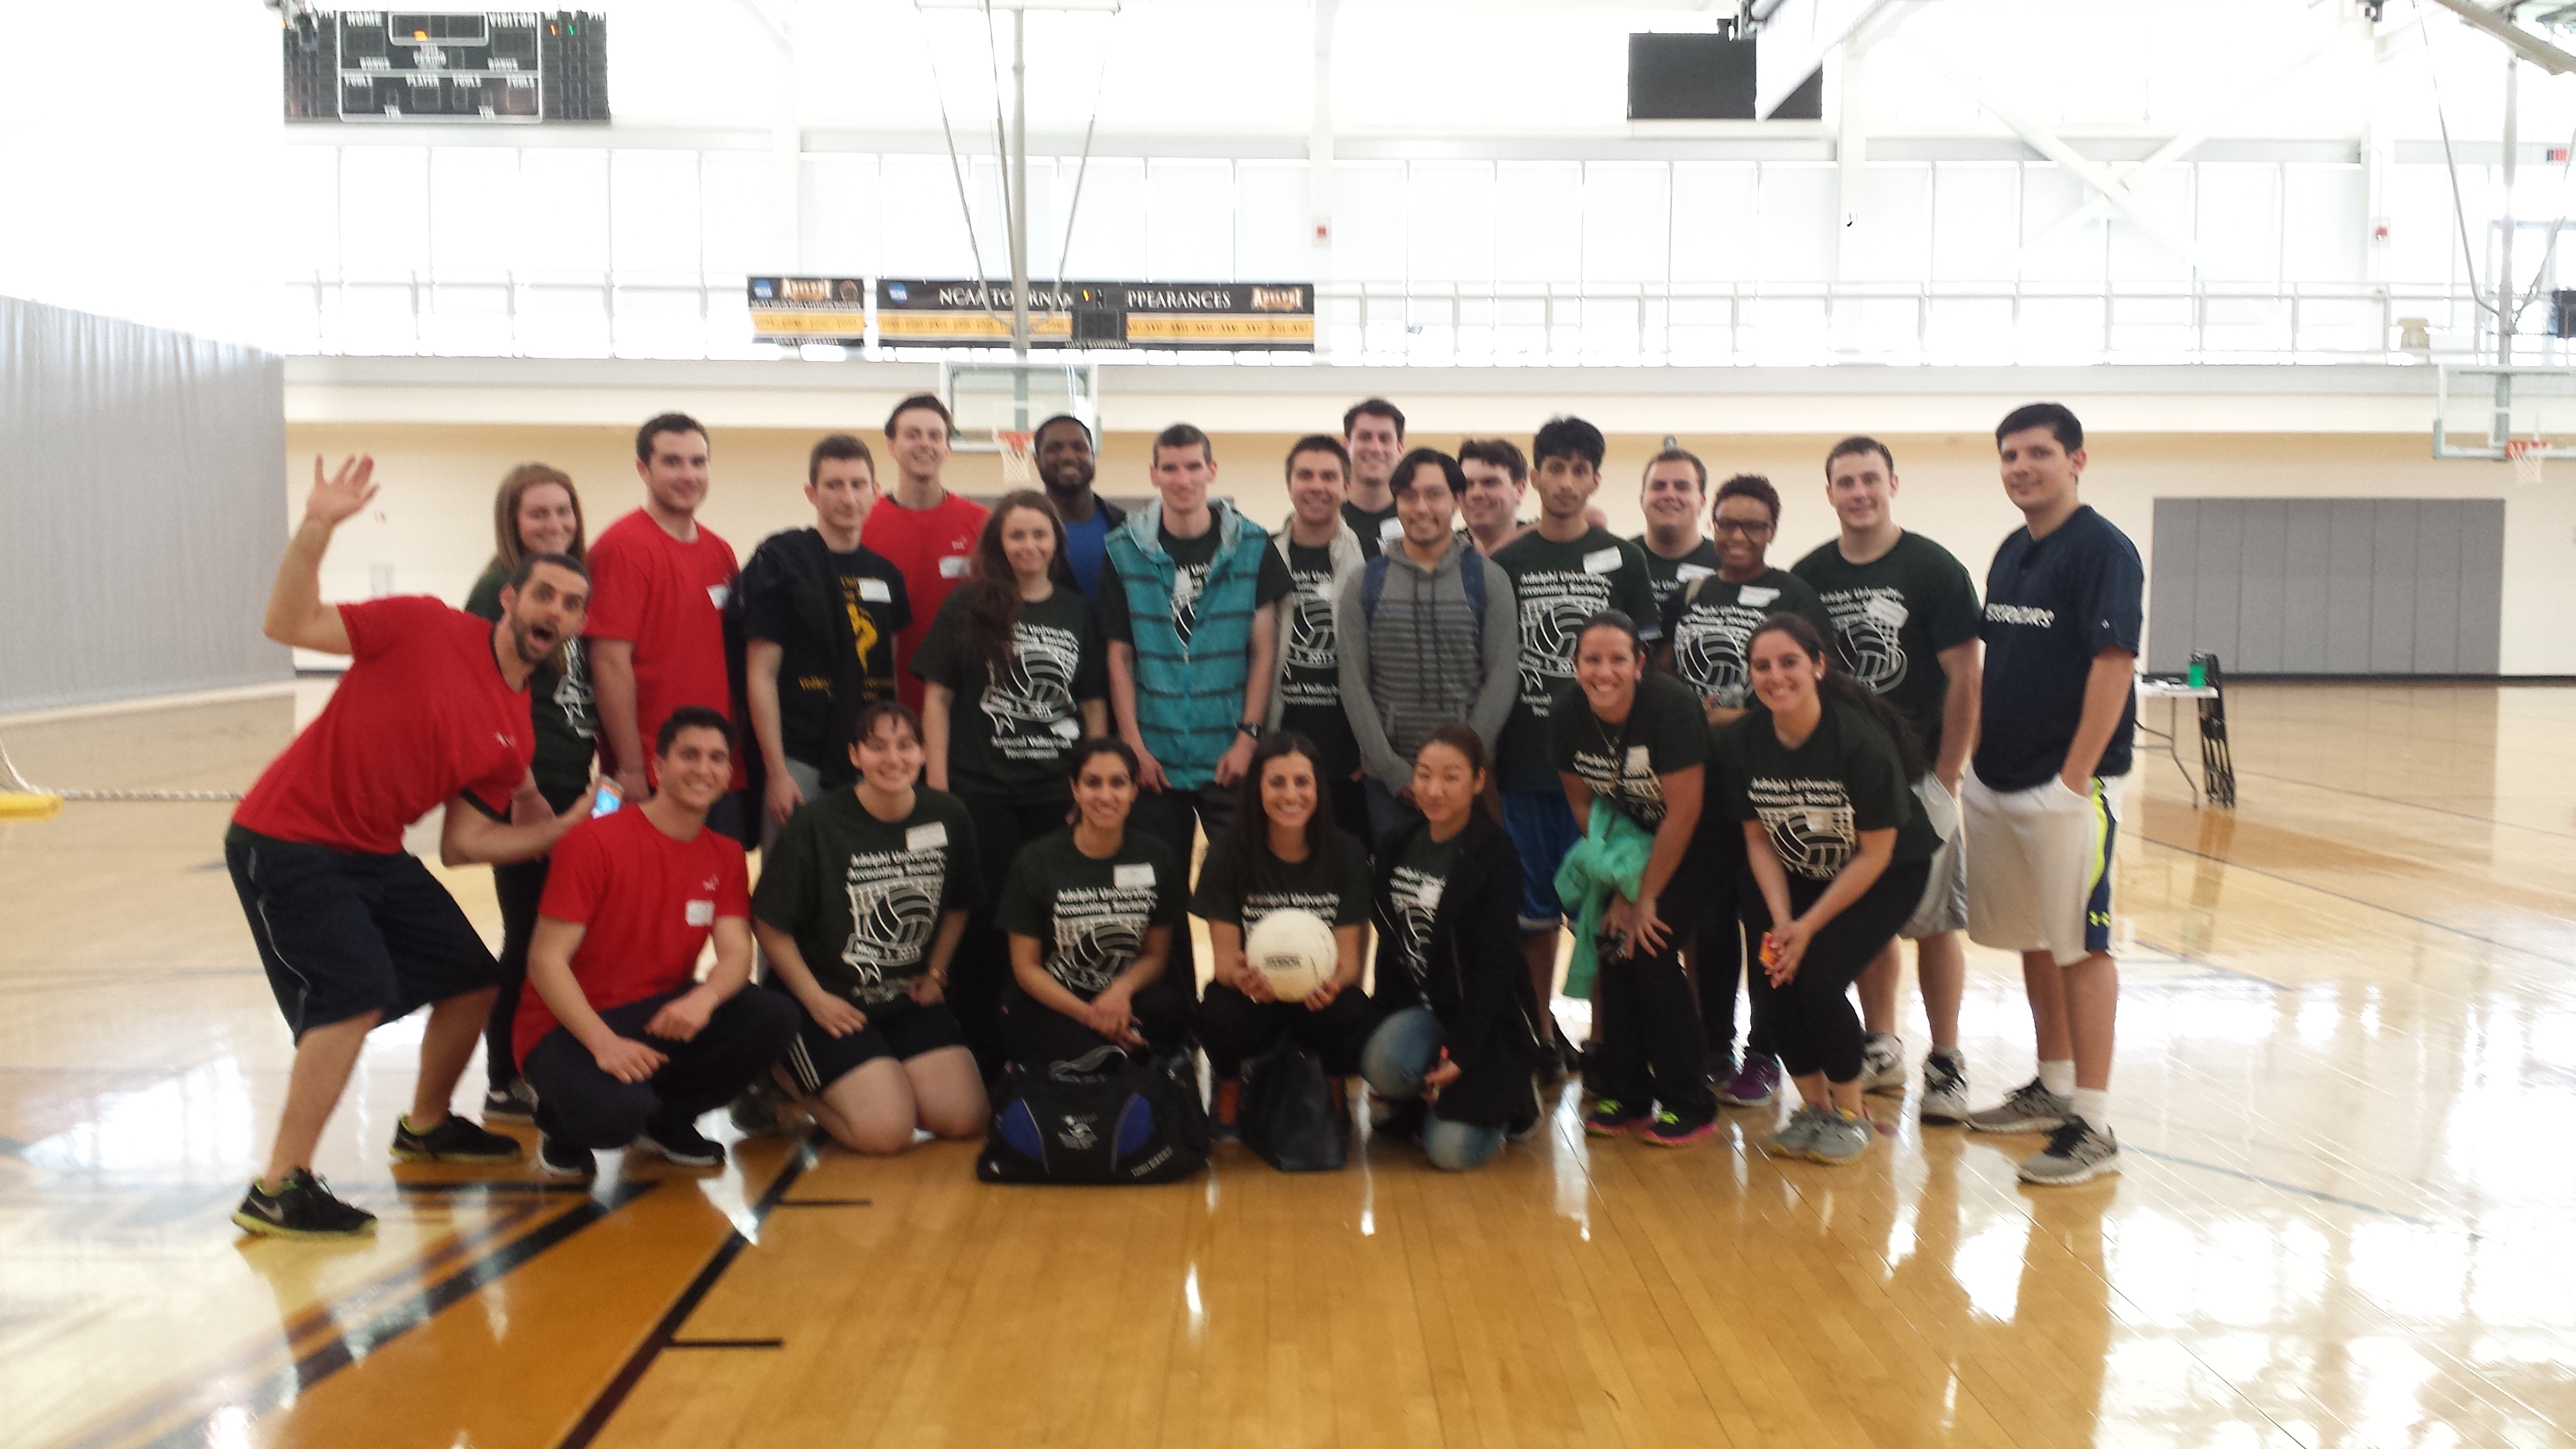 Accounting Society Volleyball Tournament 2015